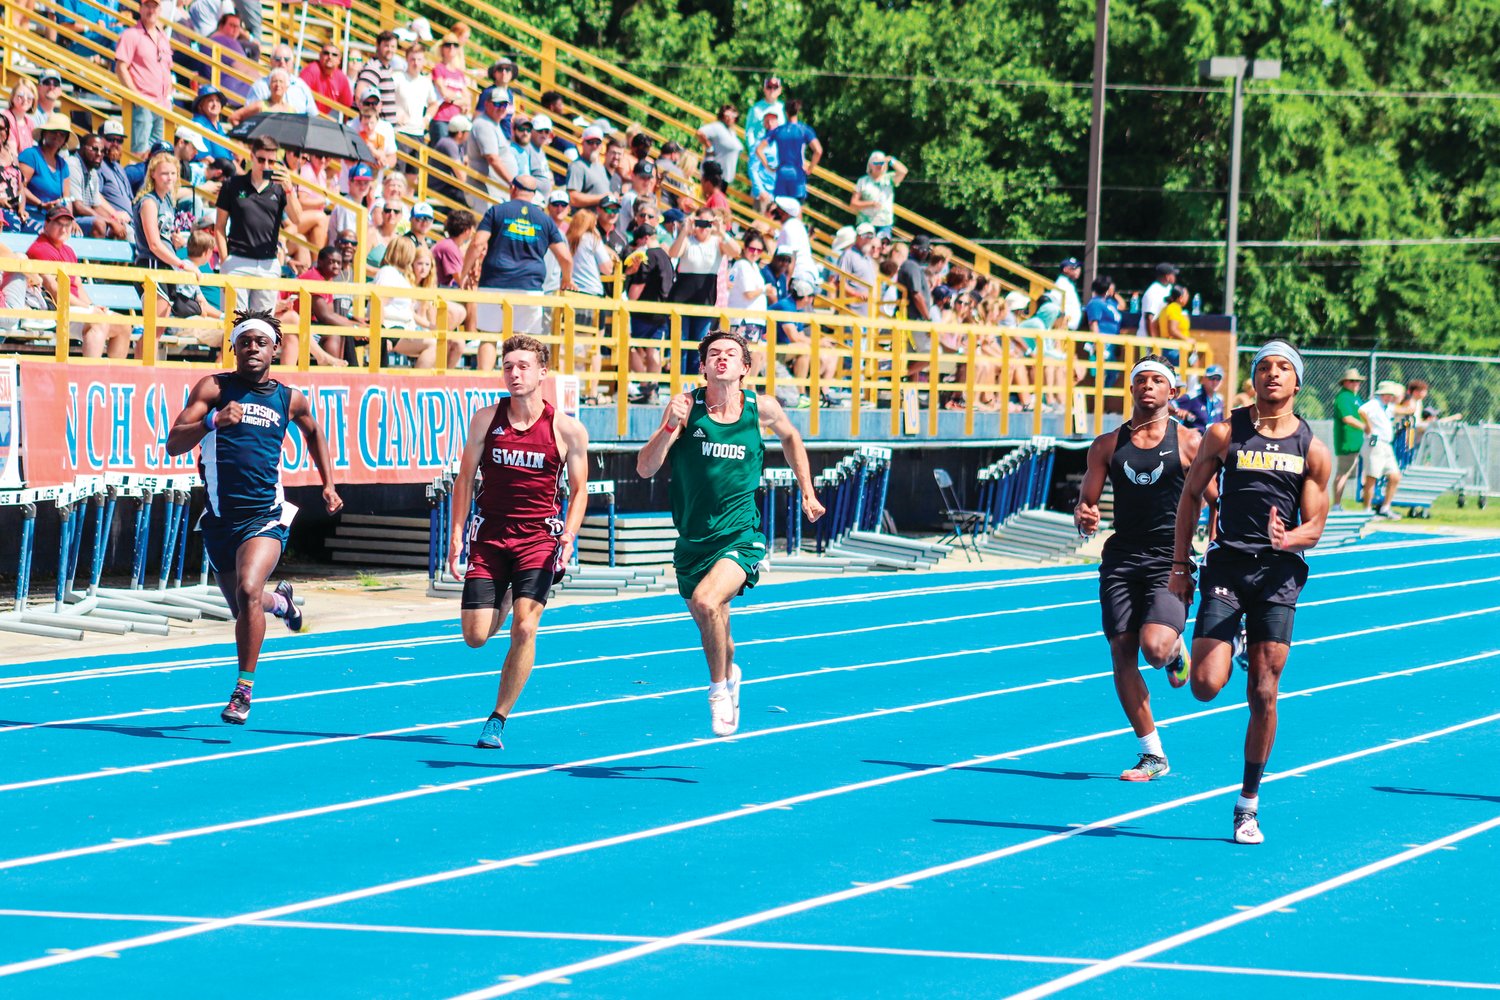 Woods Charter senior Kyle Howarth (green) strides down the track in the boys 100-meter dash at the 1A NCHSAA Track & Field State Championships at North Carolina A&T State University in Greensboro last Friday. Howarth placed 6th in the event (11.64) and 9th in the boys 200-meter dash (23.96).